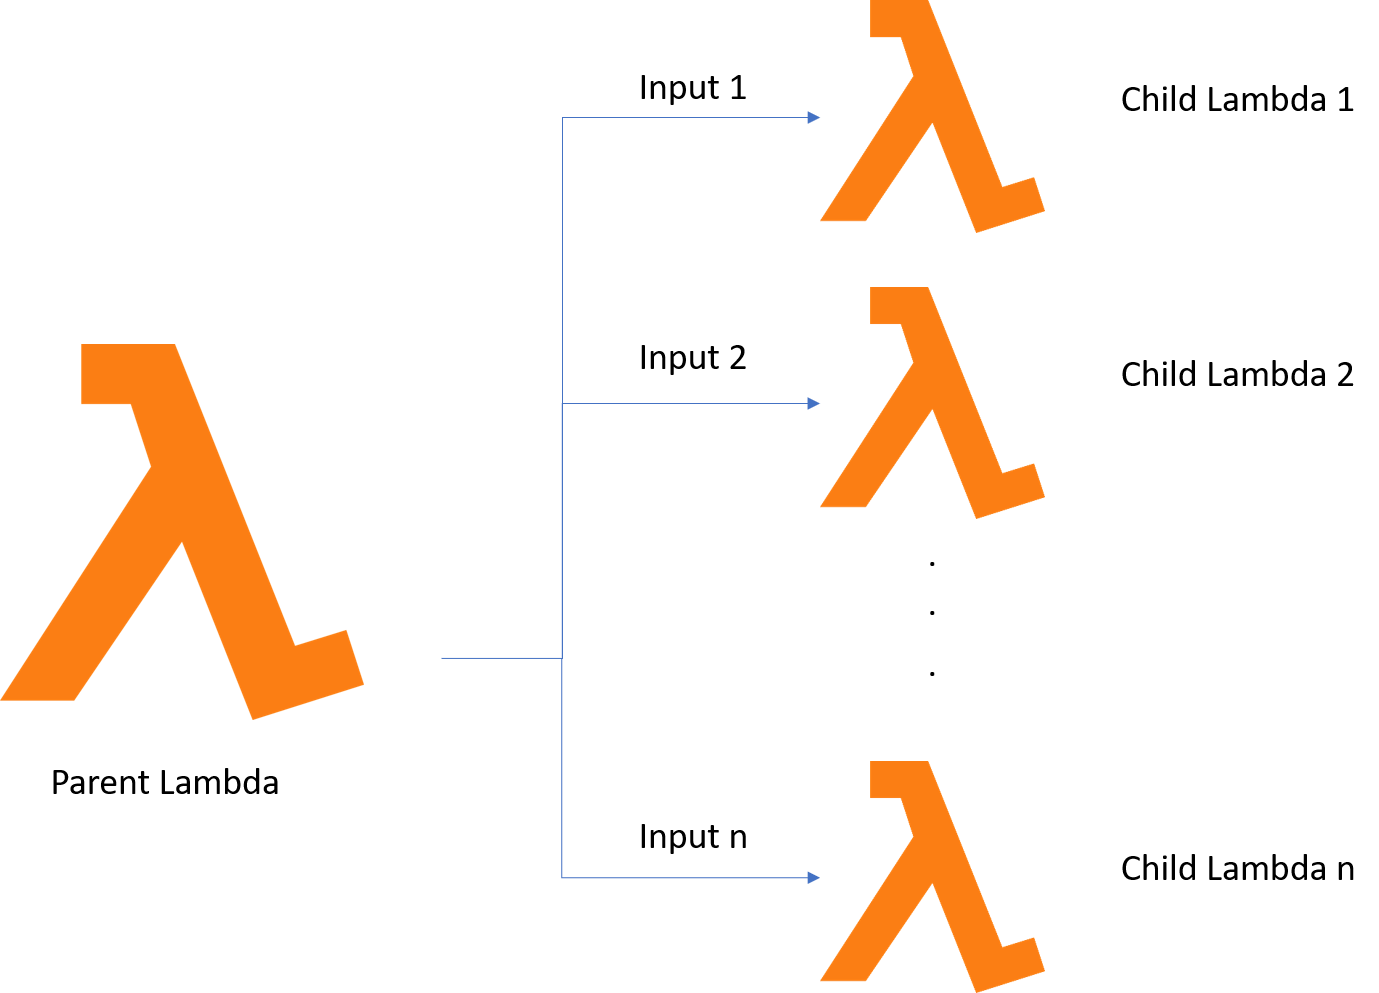 Triggering one AWS lambda from another using the serverless